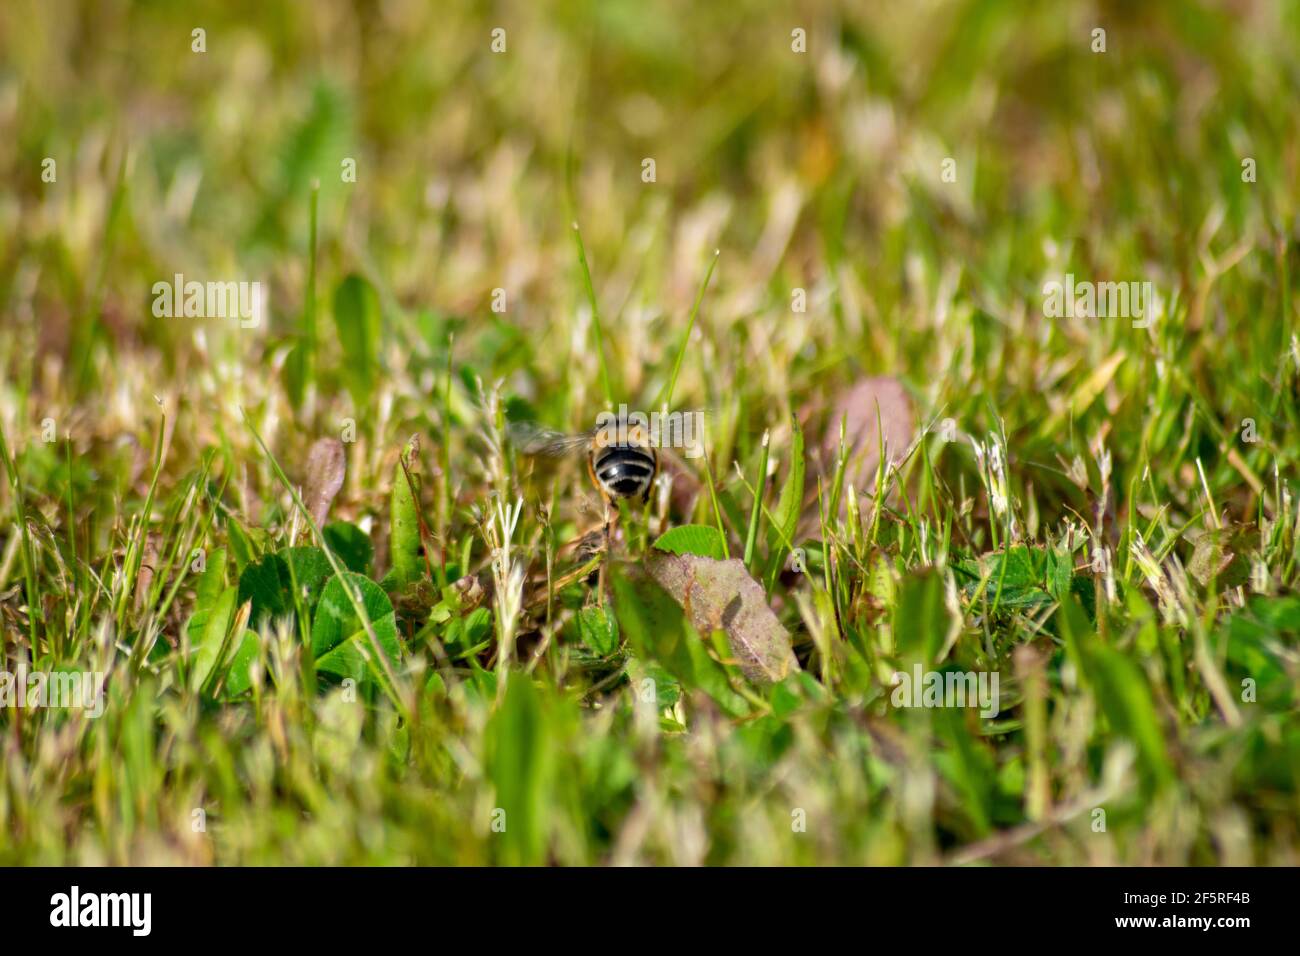 Bee polinozation with single bee flying over the green grass Stock Photo